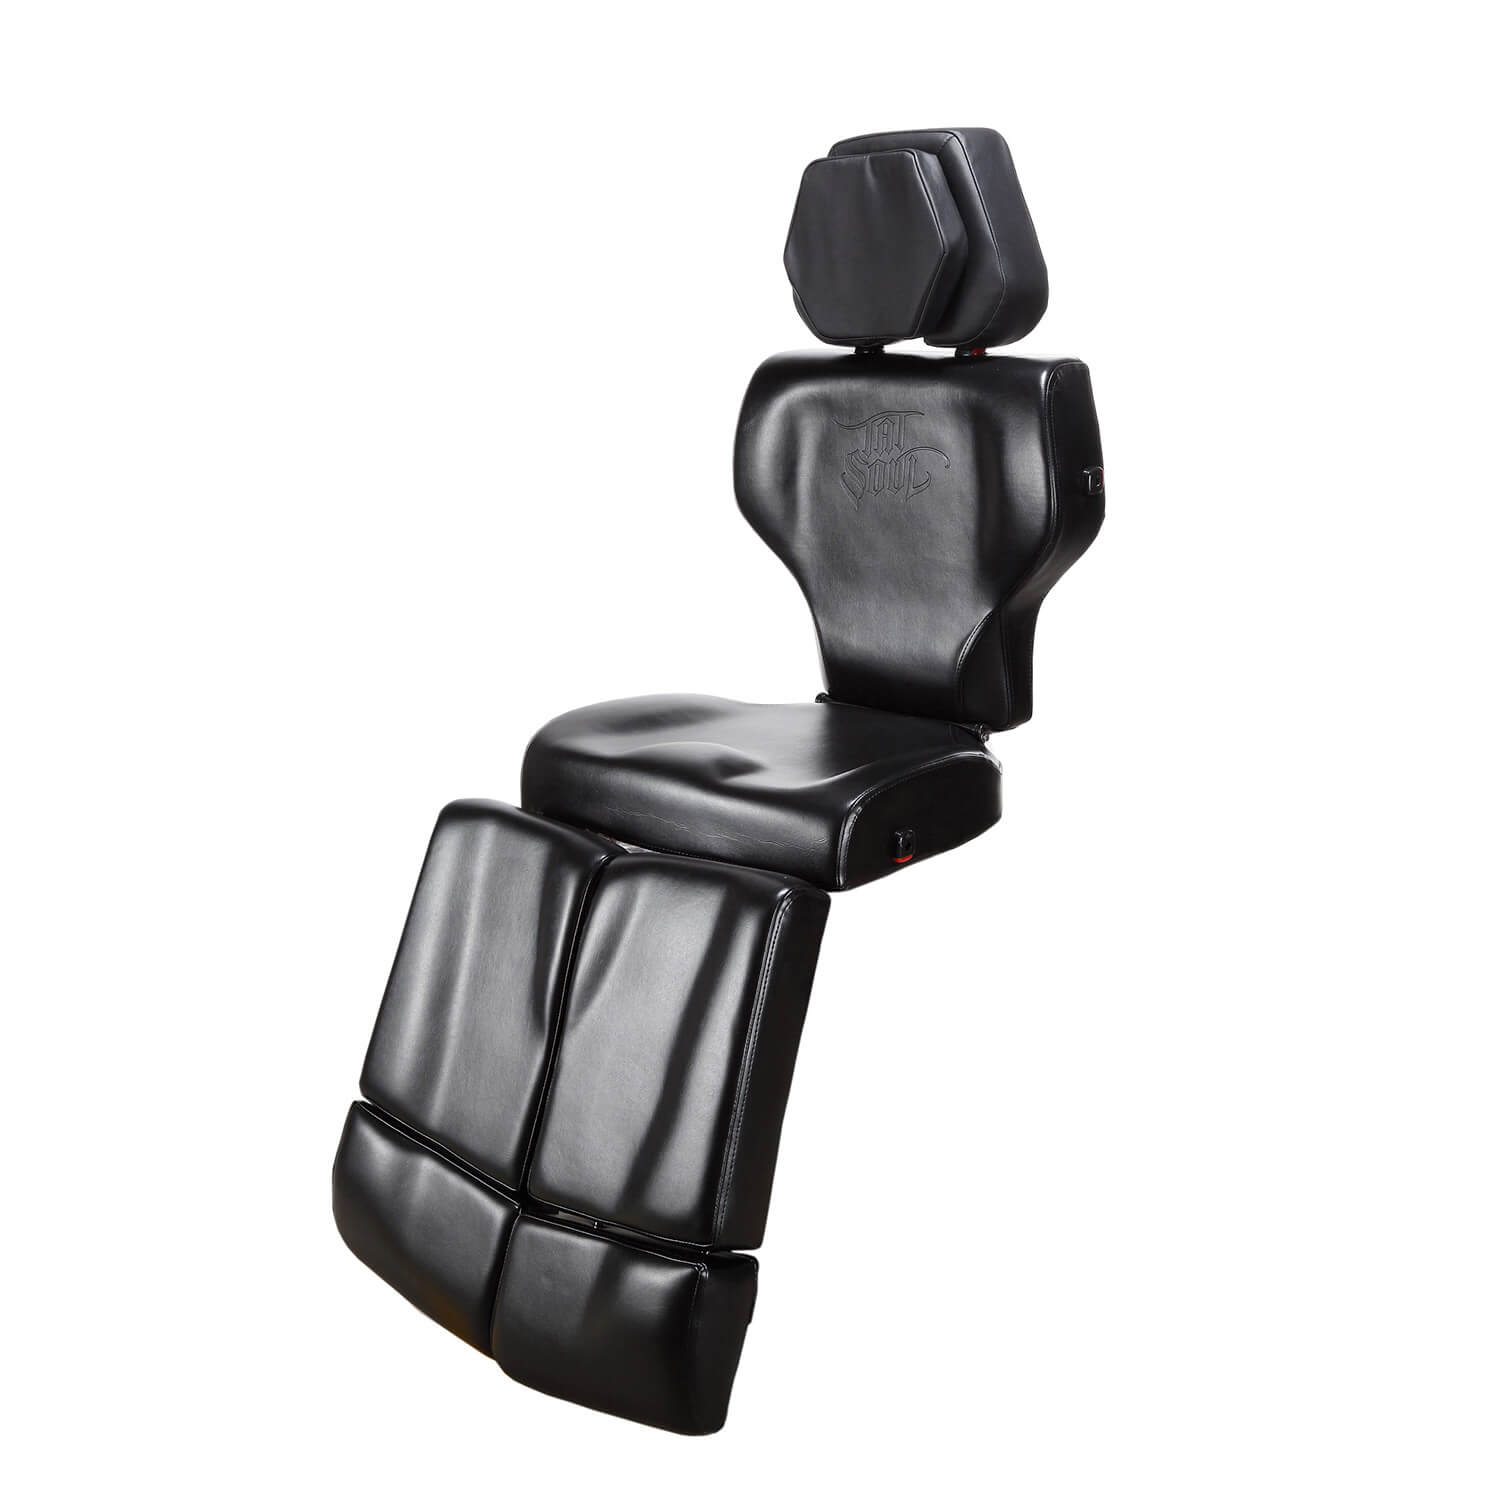 570 Tattoo Client Chair Black with Cushion Upgrade